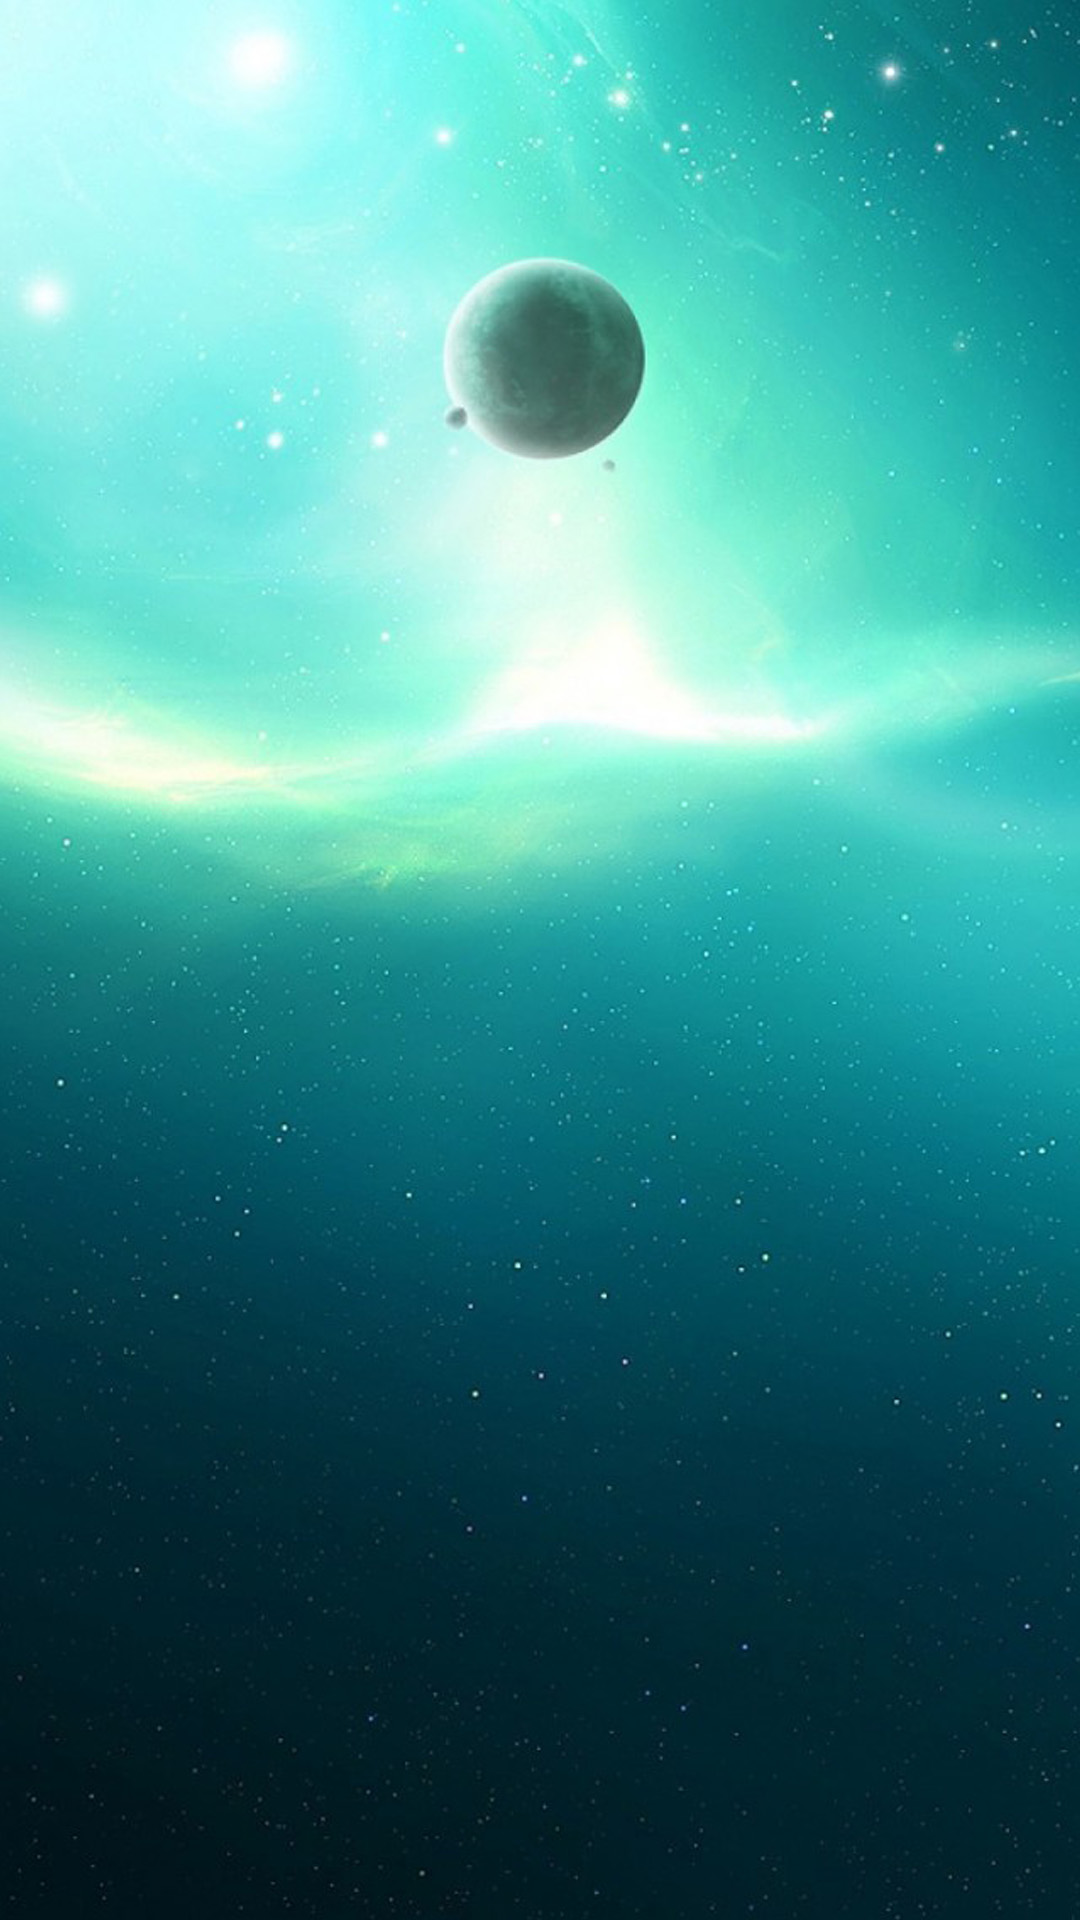 Space LG G2 Wallpapers HD 59, LG G2 Wallpapers, LG Backgrounds